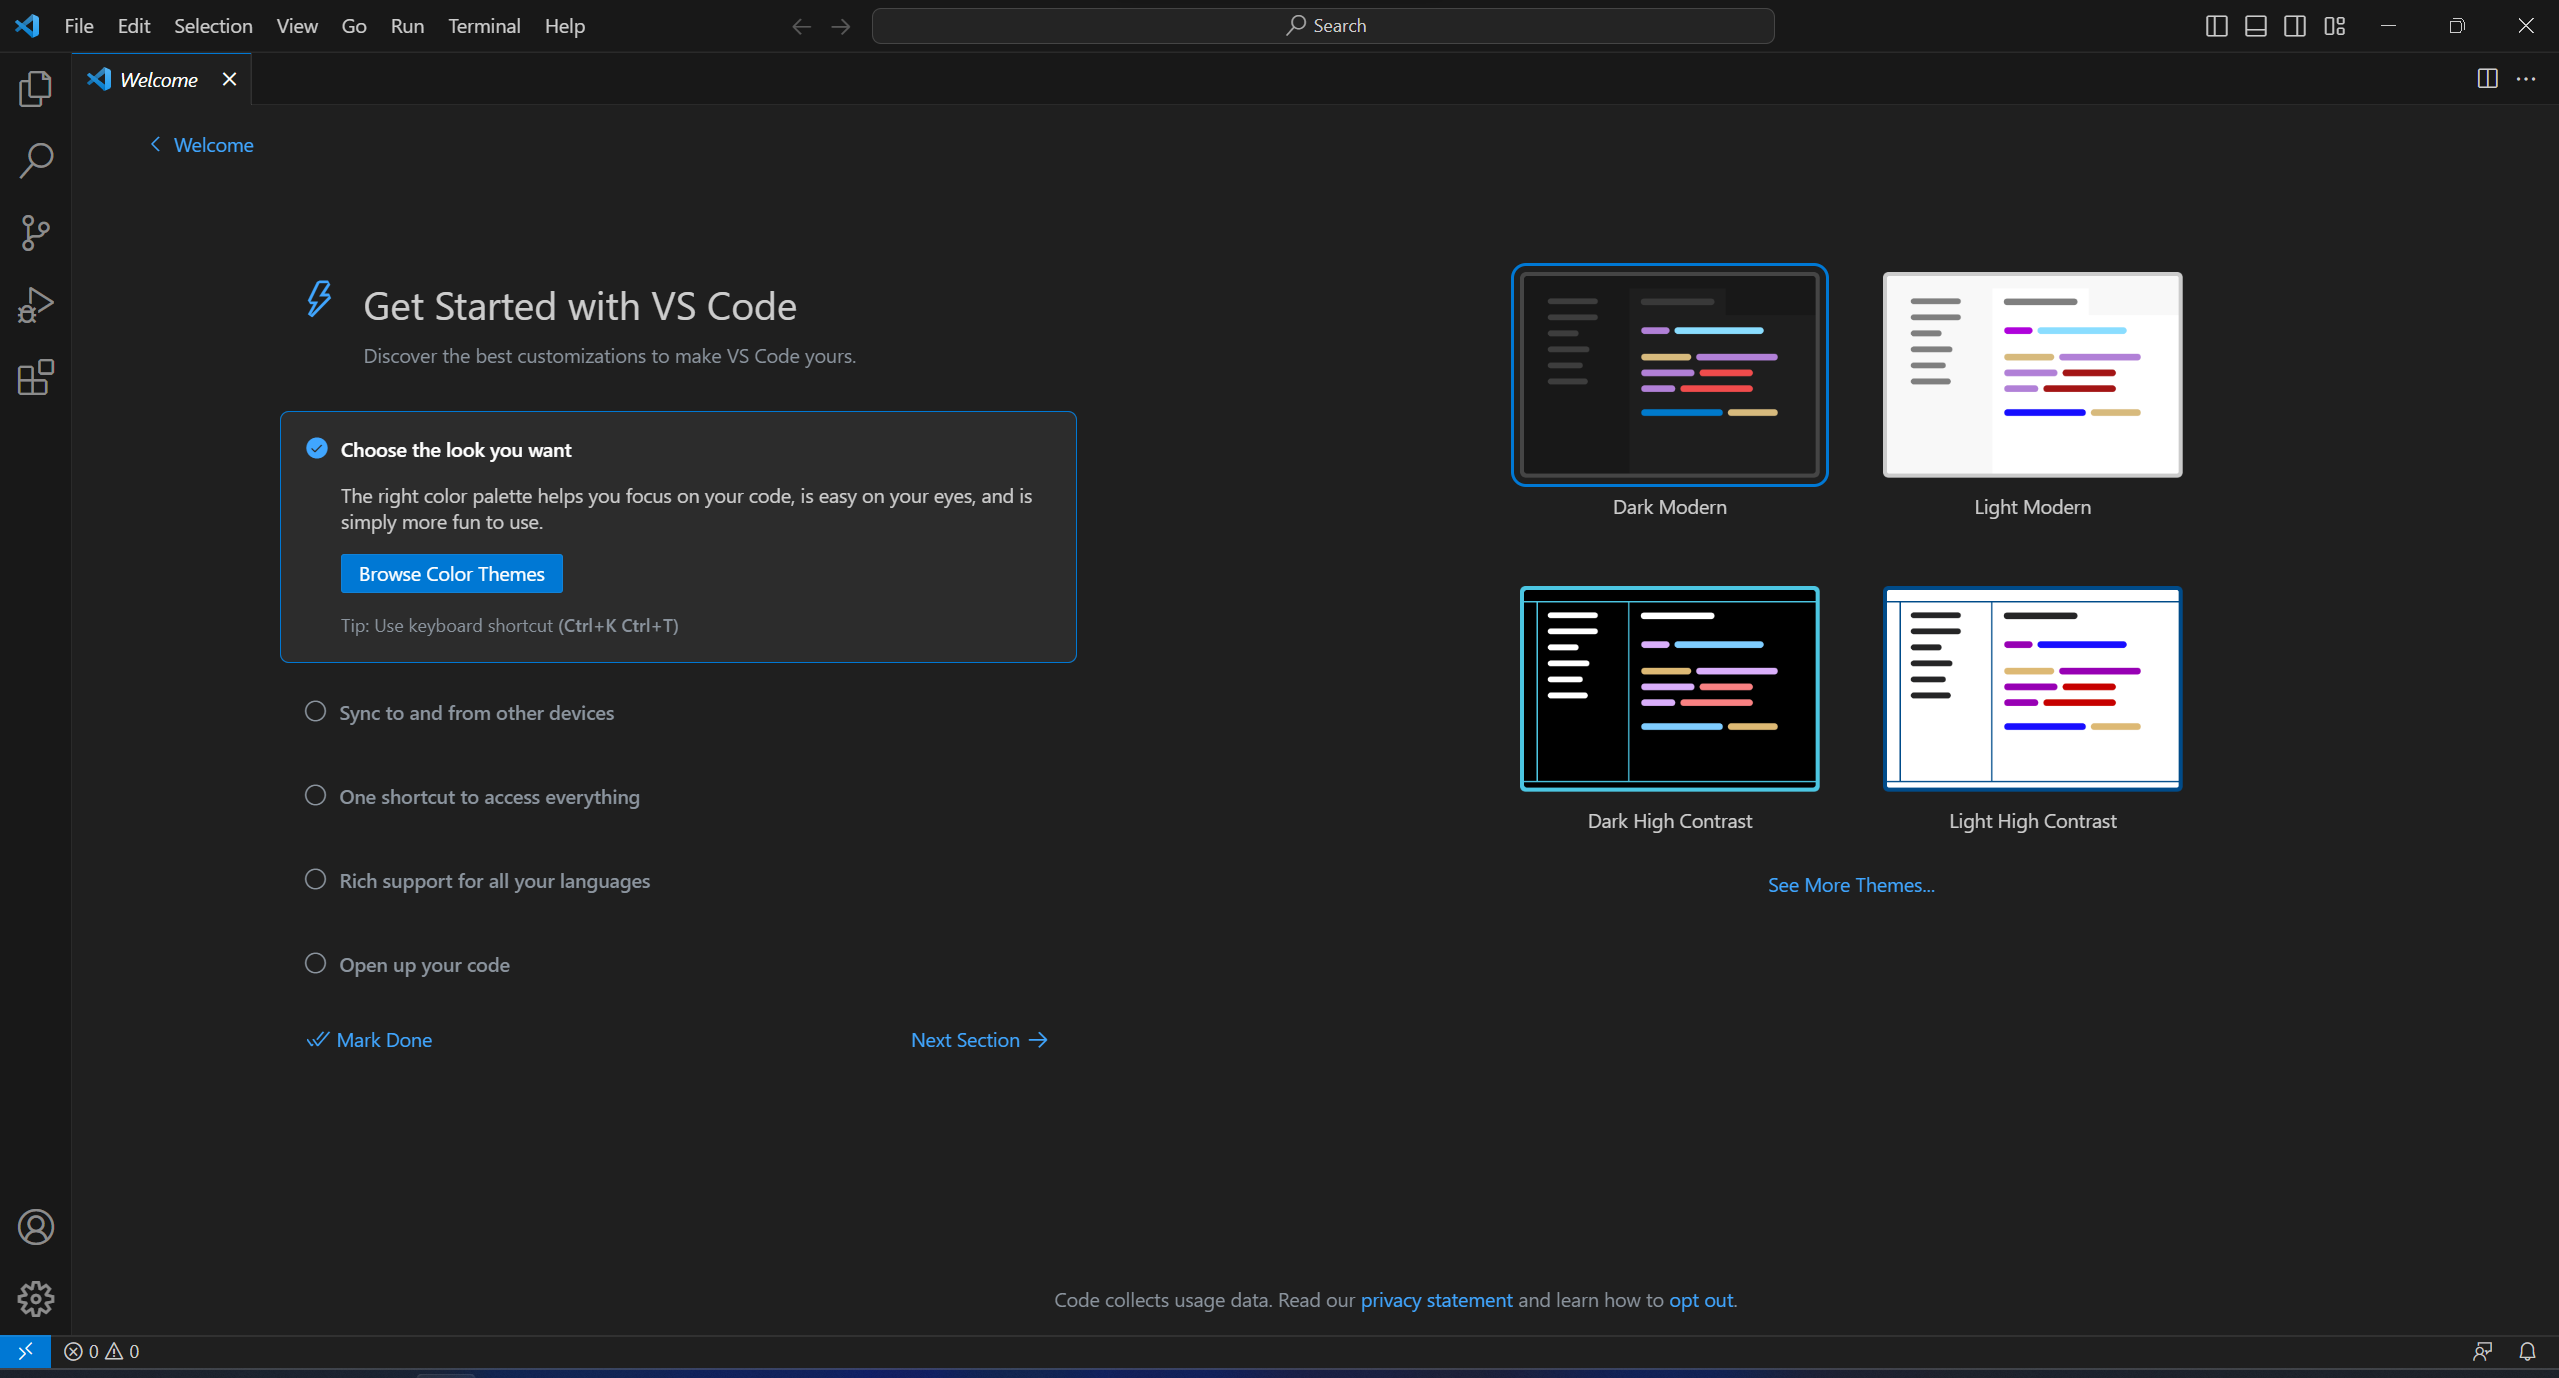 Get Started with VS Code